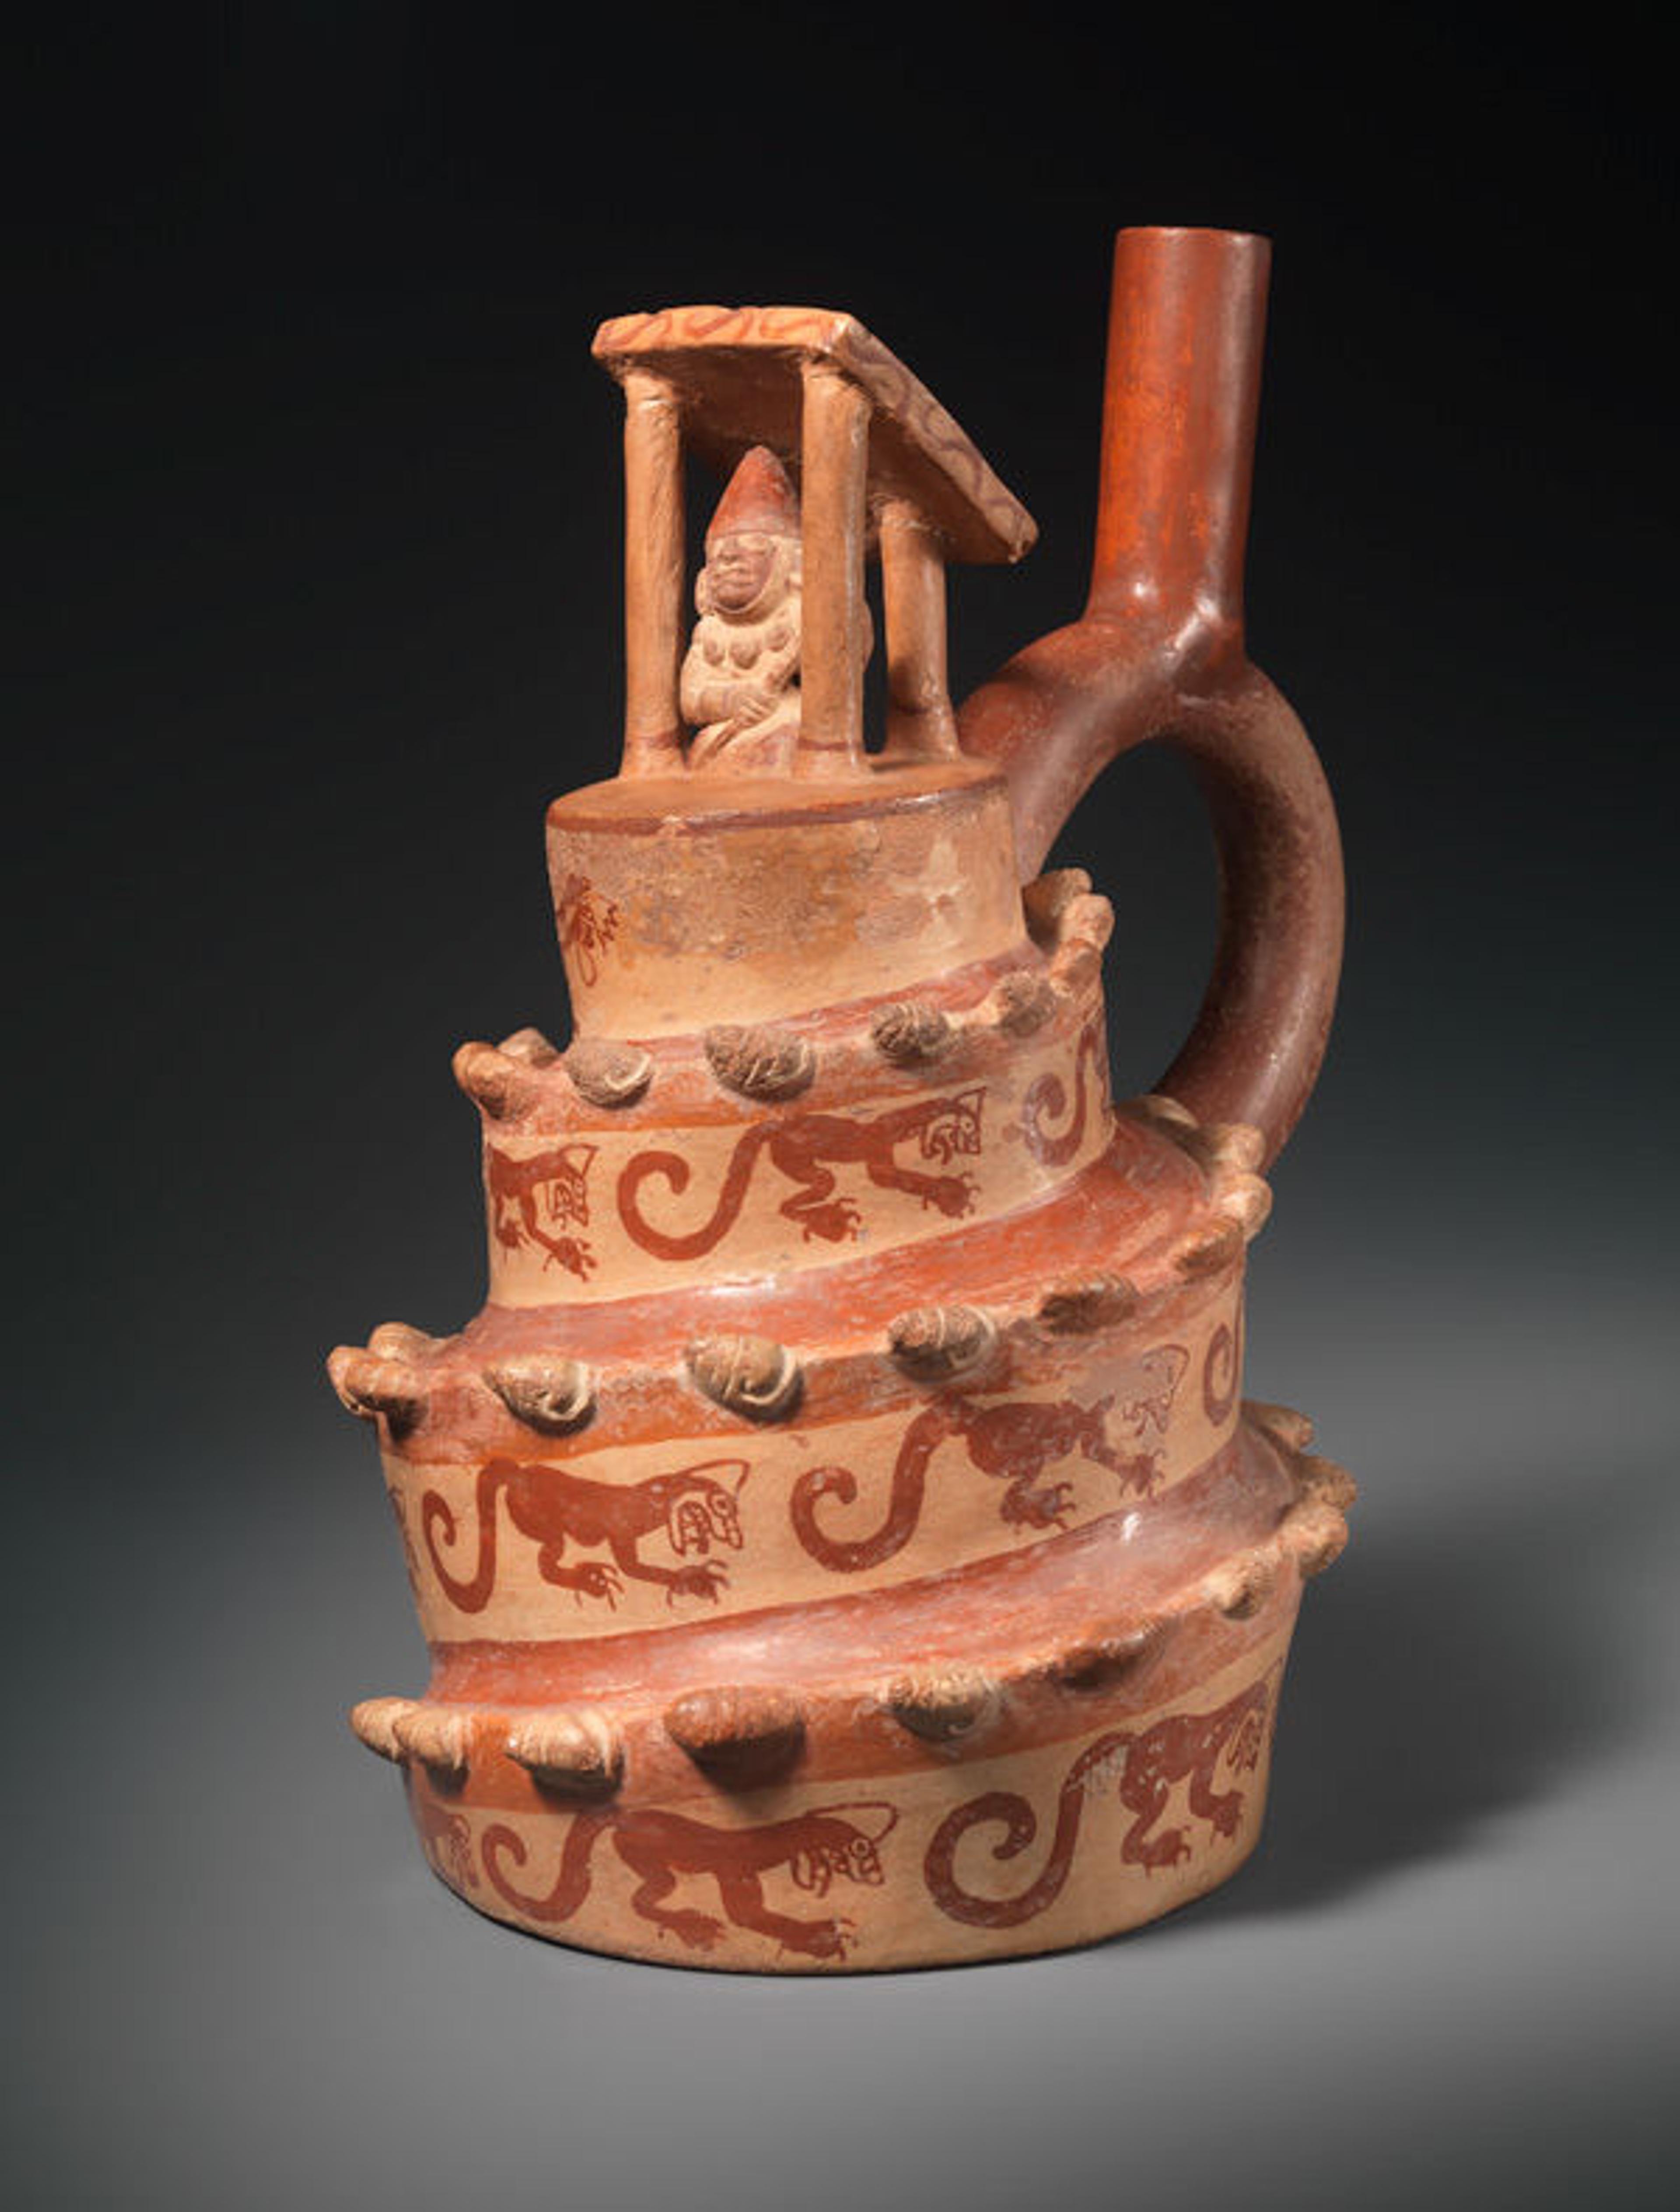 This vessel is modeled in the shape of a spiral platform surmounted by an open-sided structure with a figure inside. Architectural vessel, A.D. 400–600. Peru. Moche. Ceramic; H. 8 7/16 x W. 5 1/2 in. (21.51 x 13.97 cm). The Metropolitan Museum of Art, New York, Gift of Nathan Cummings, 1963 (63.226.13)